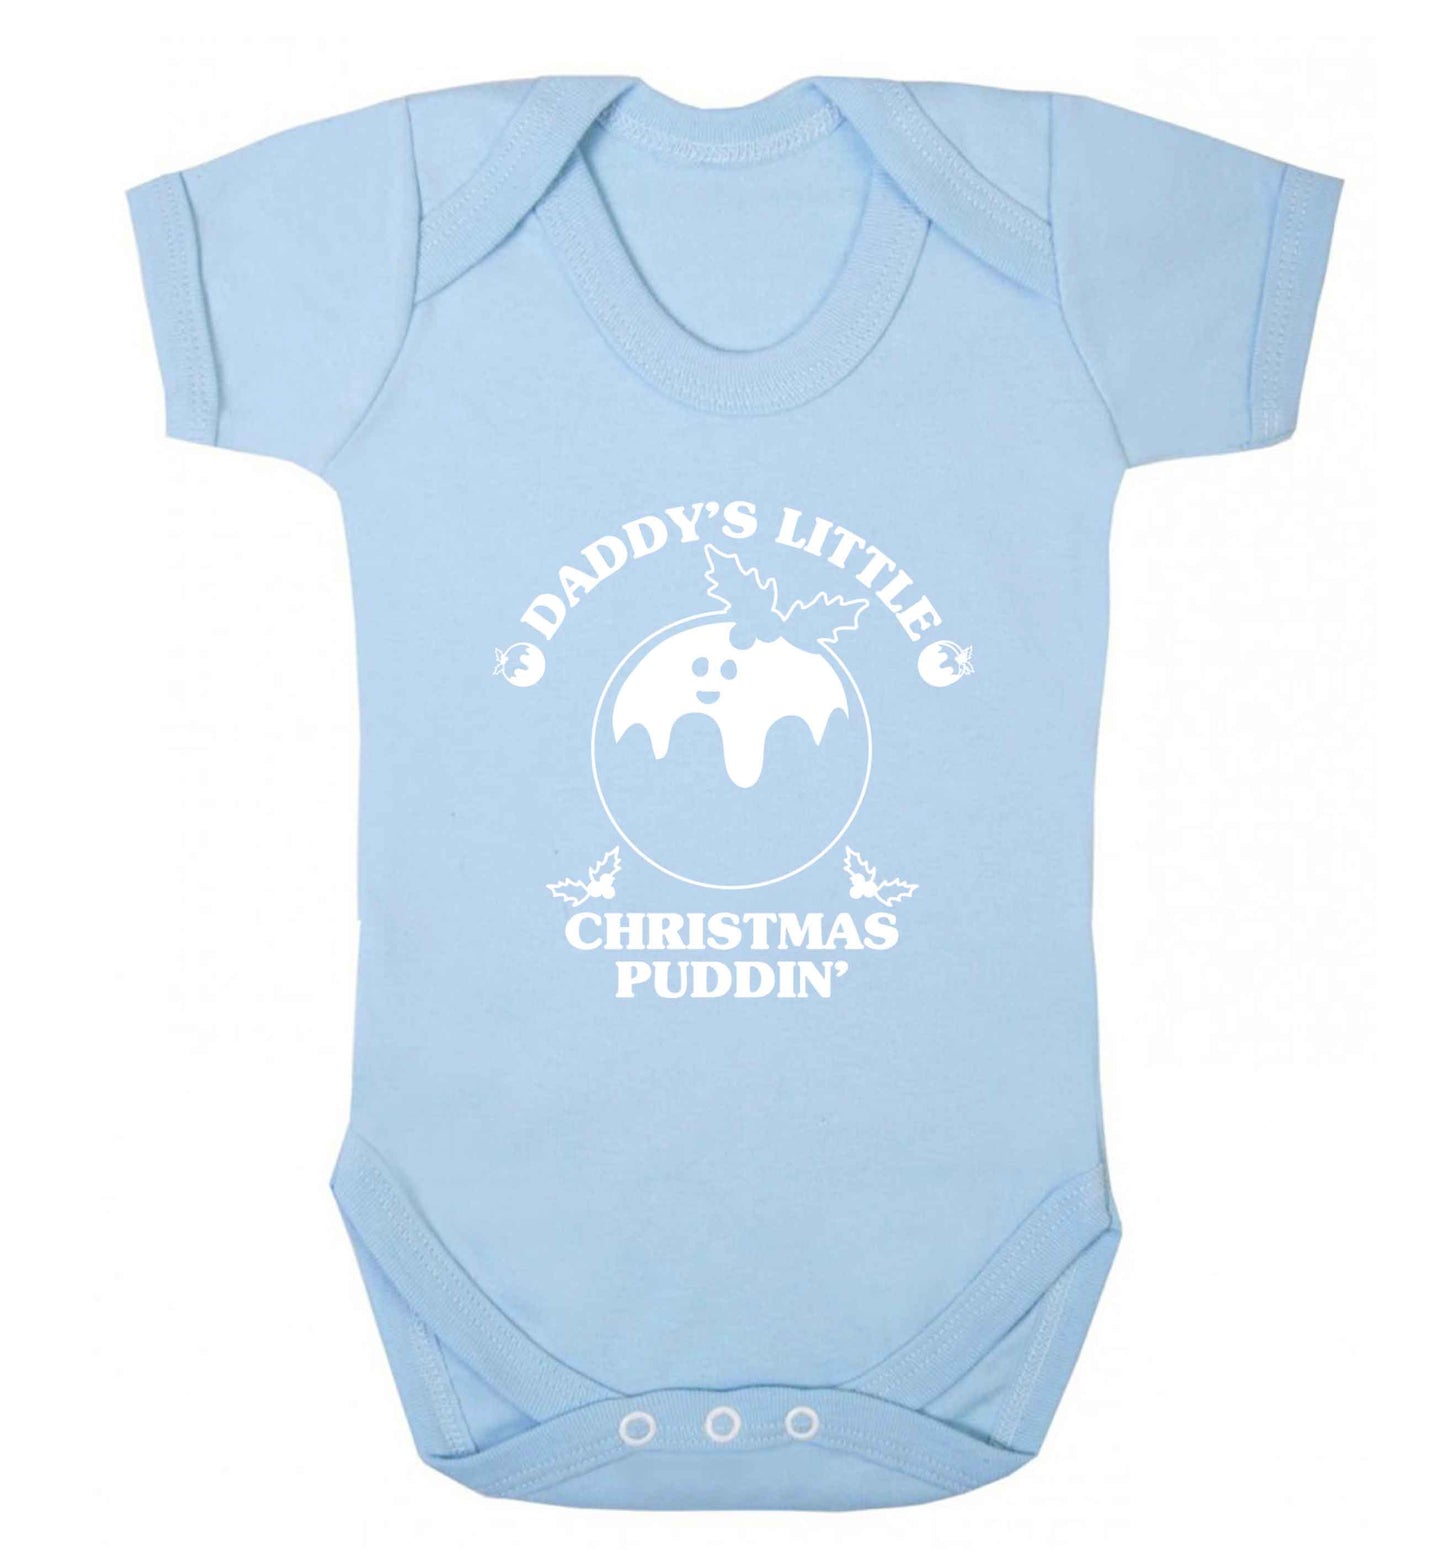 Daddy's little Christmas puddin' Baby Vest pale blue 18-24 months